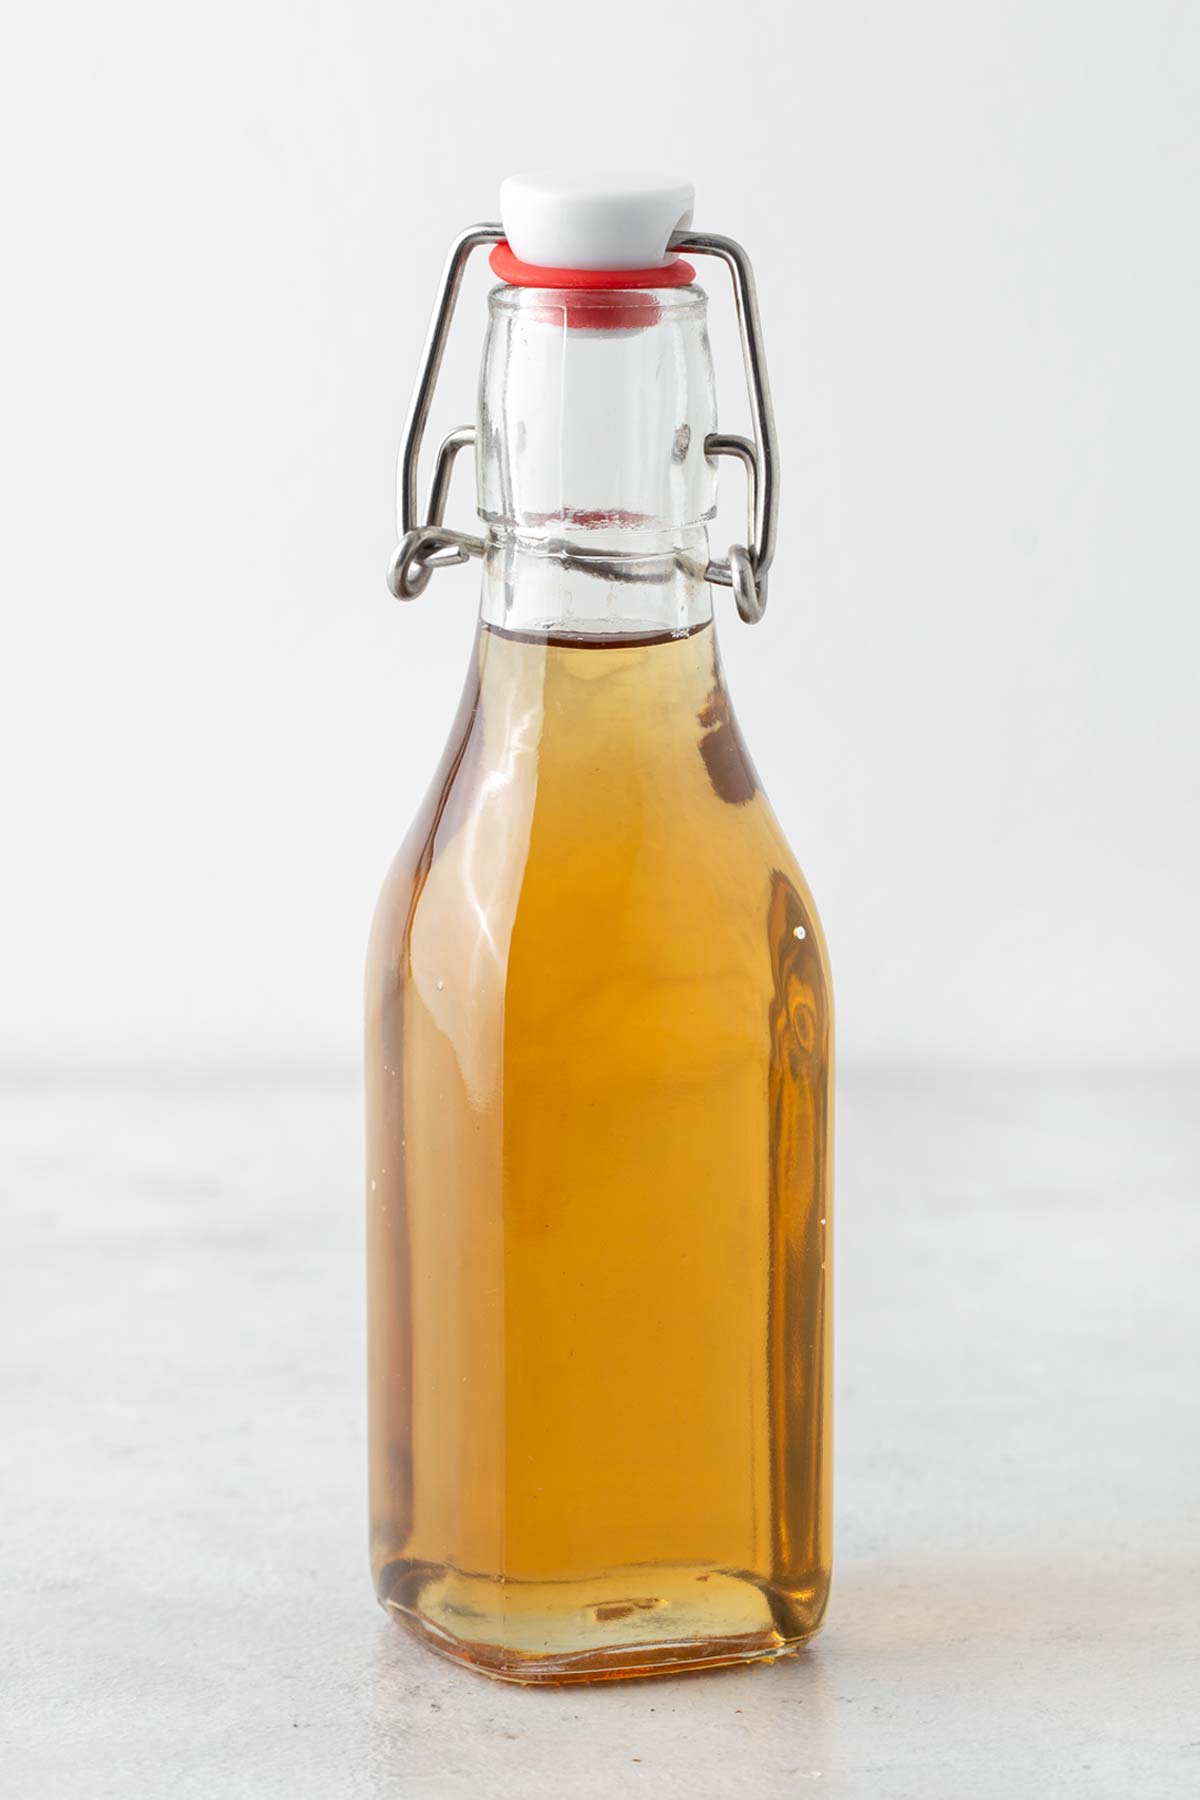 Vanilla syrup in a glass bottle.